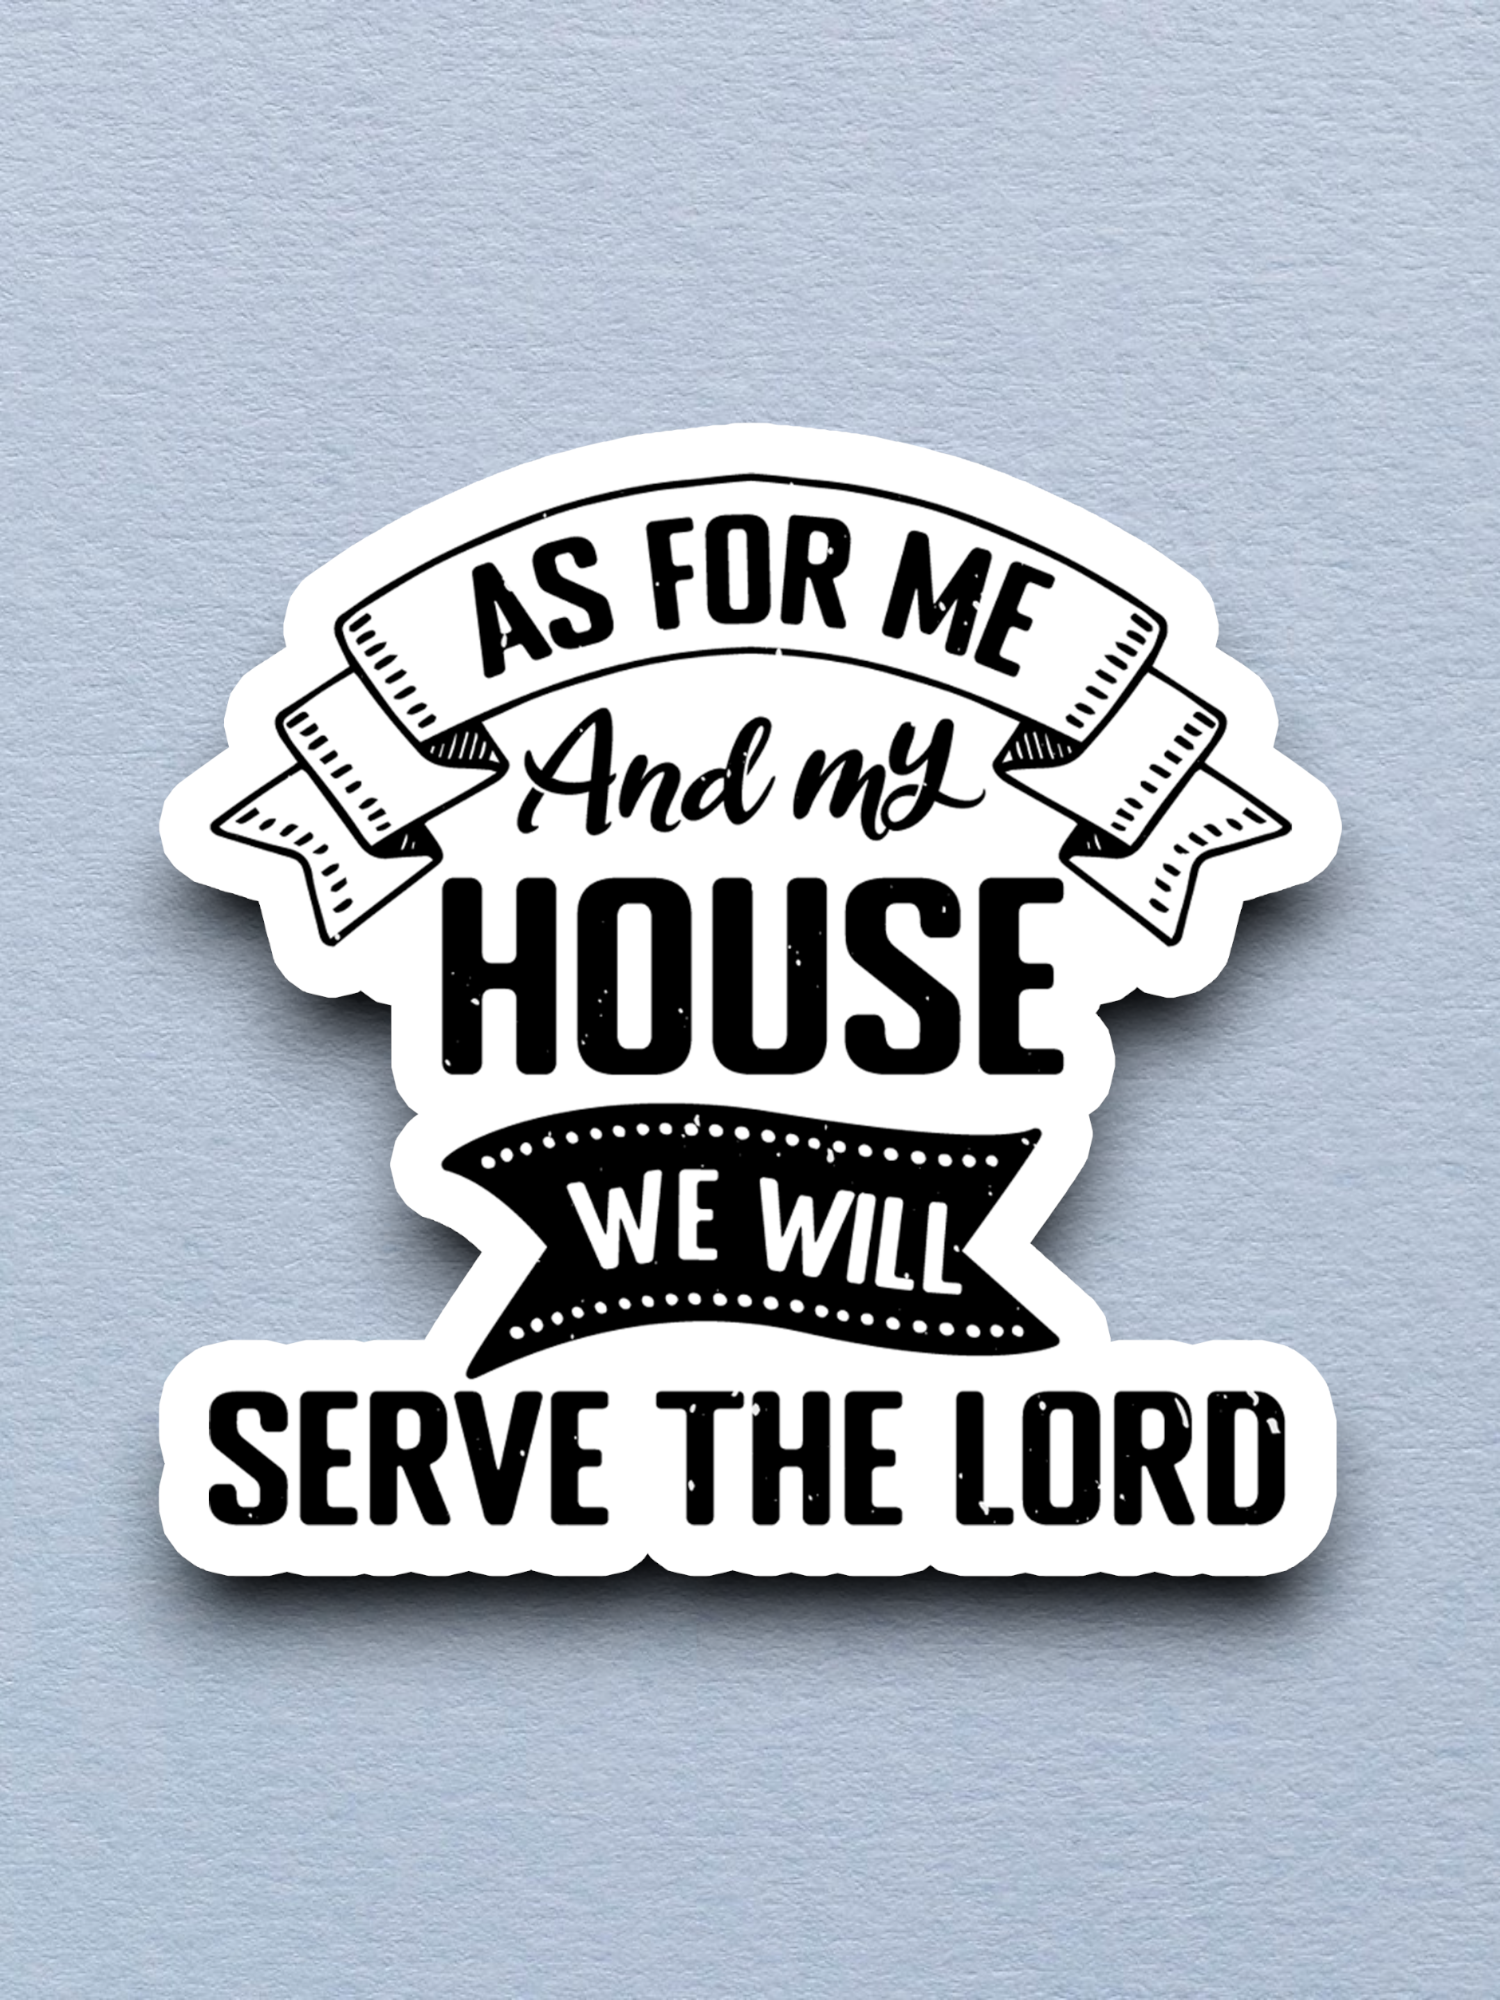 As For Me and My House We Will Serve the Lord - Faith Sticker